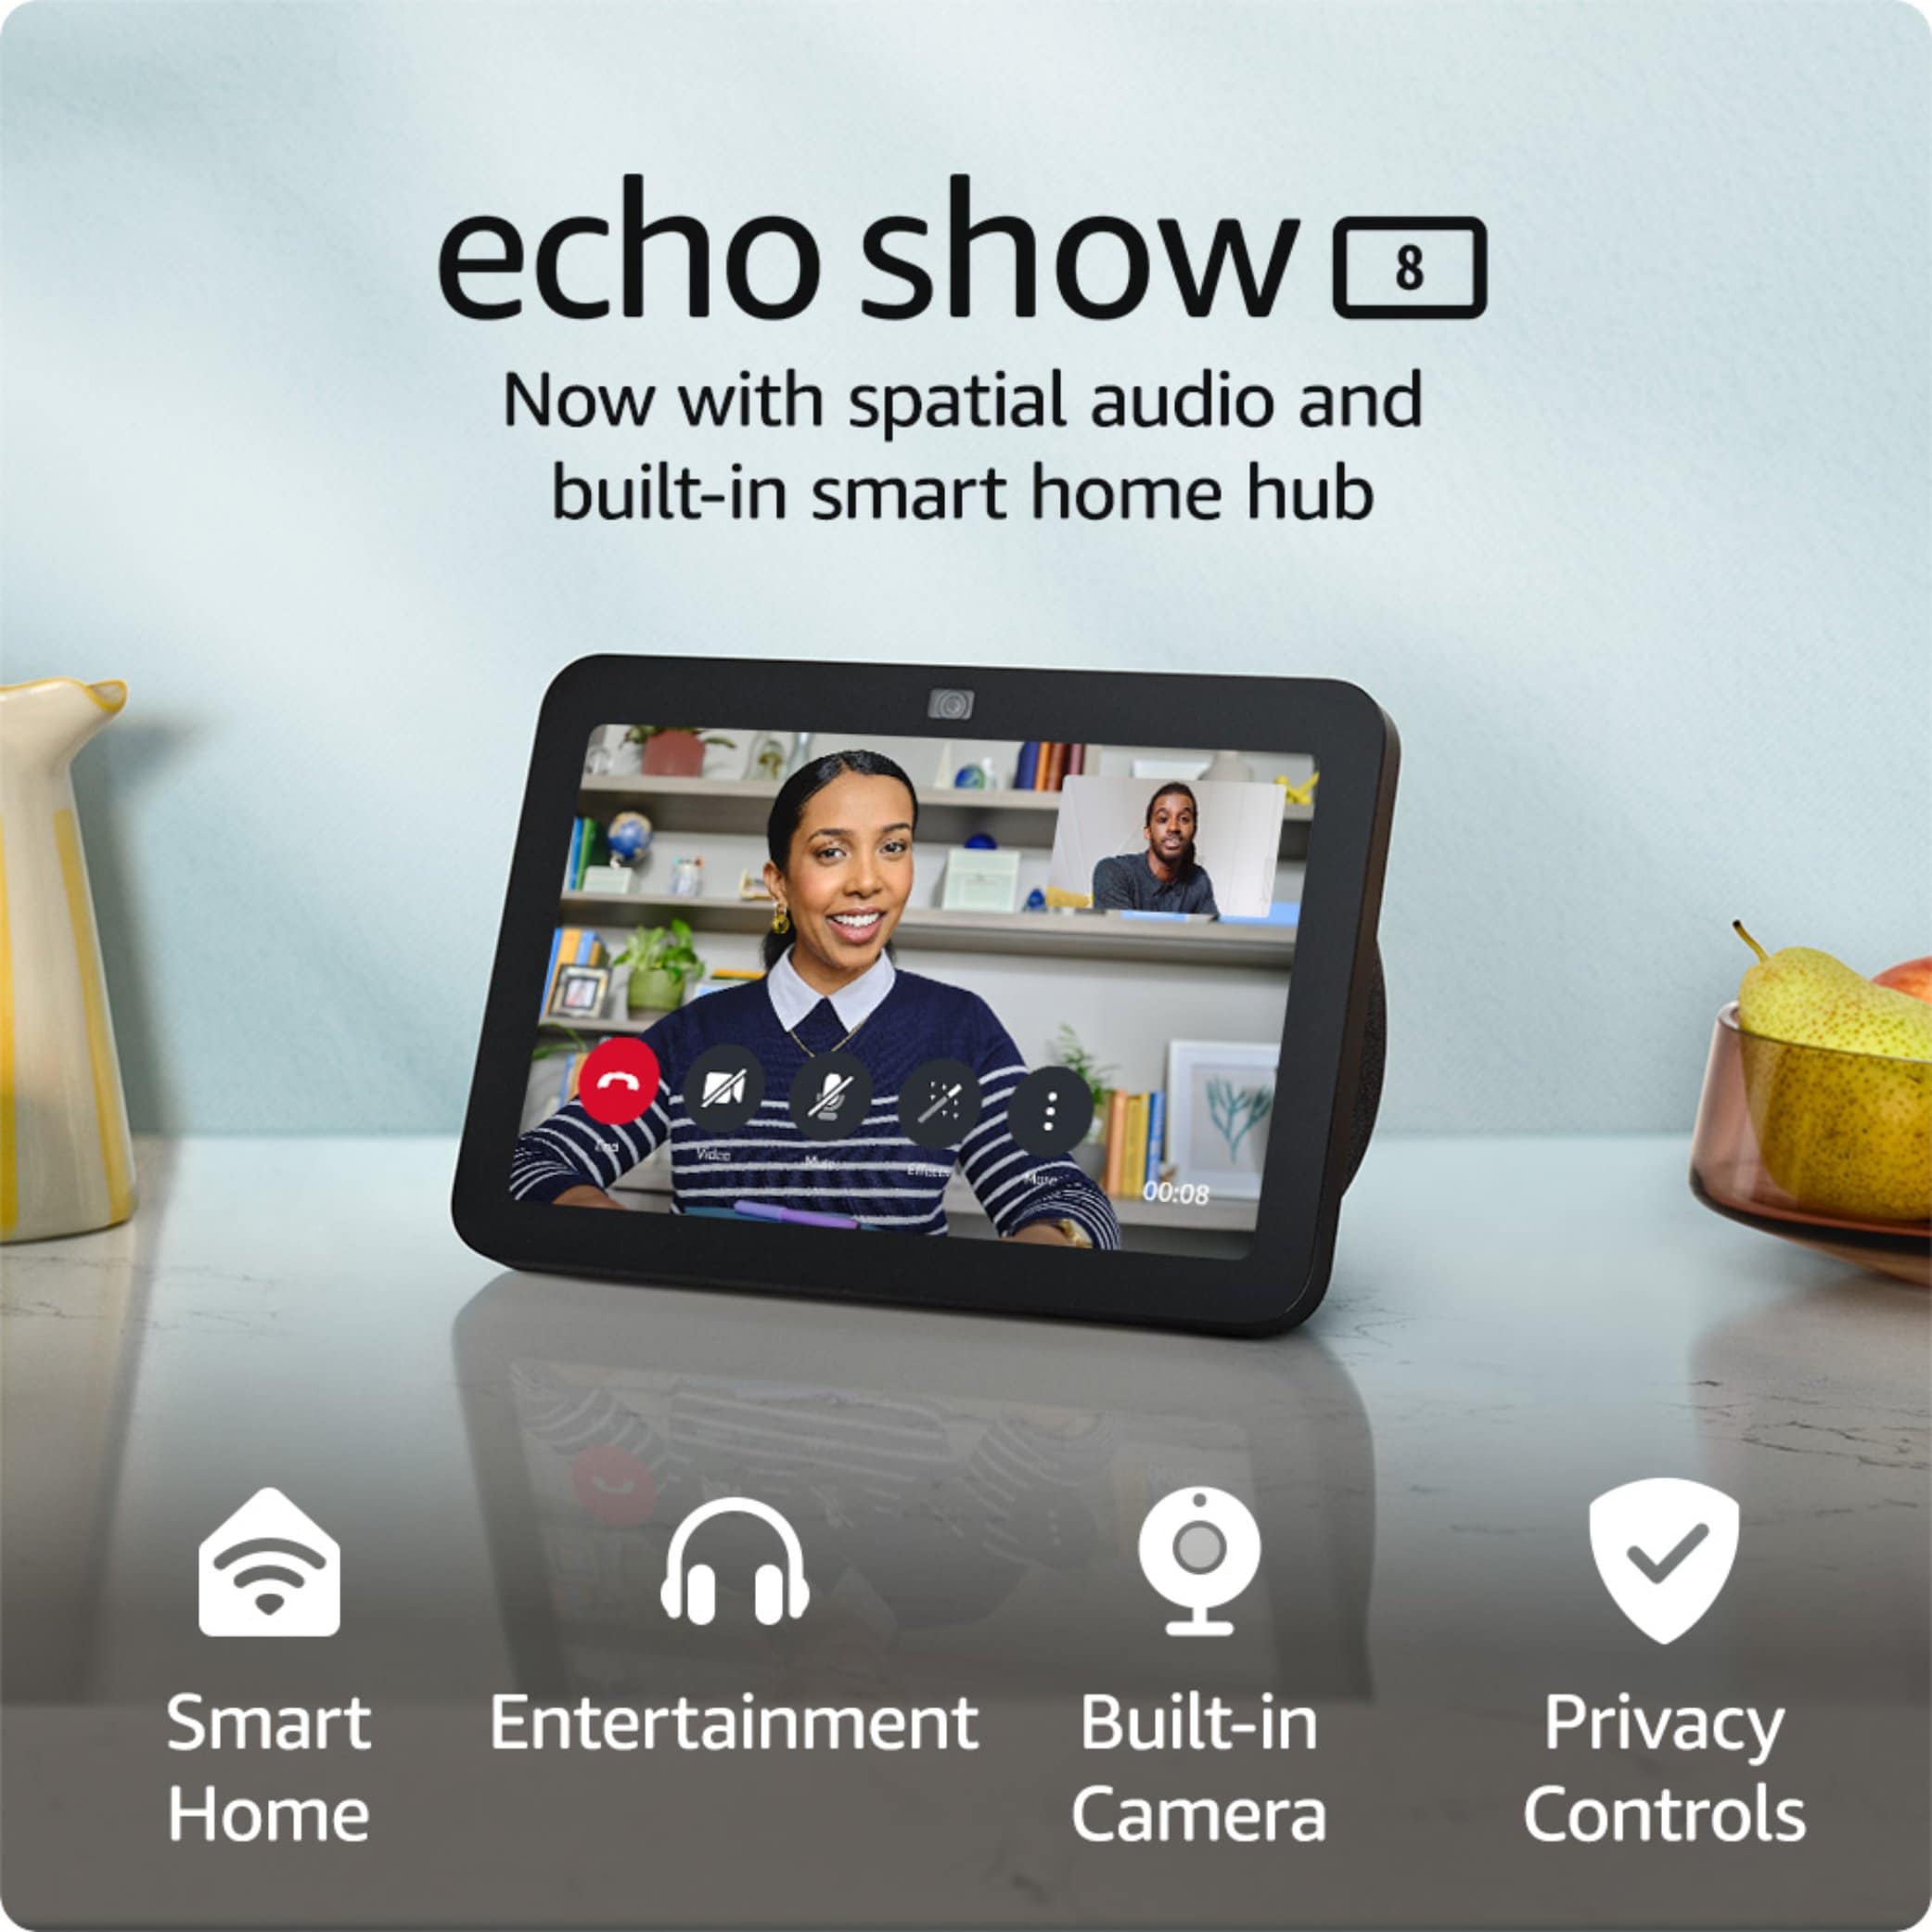 Does the  Echo Show 8 work with Ring products?